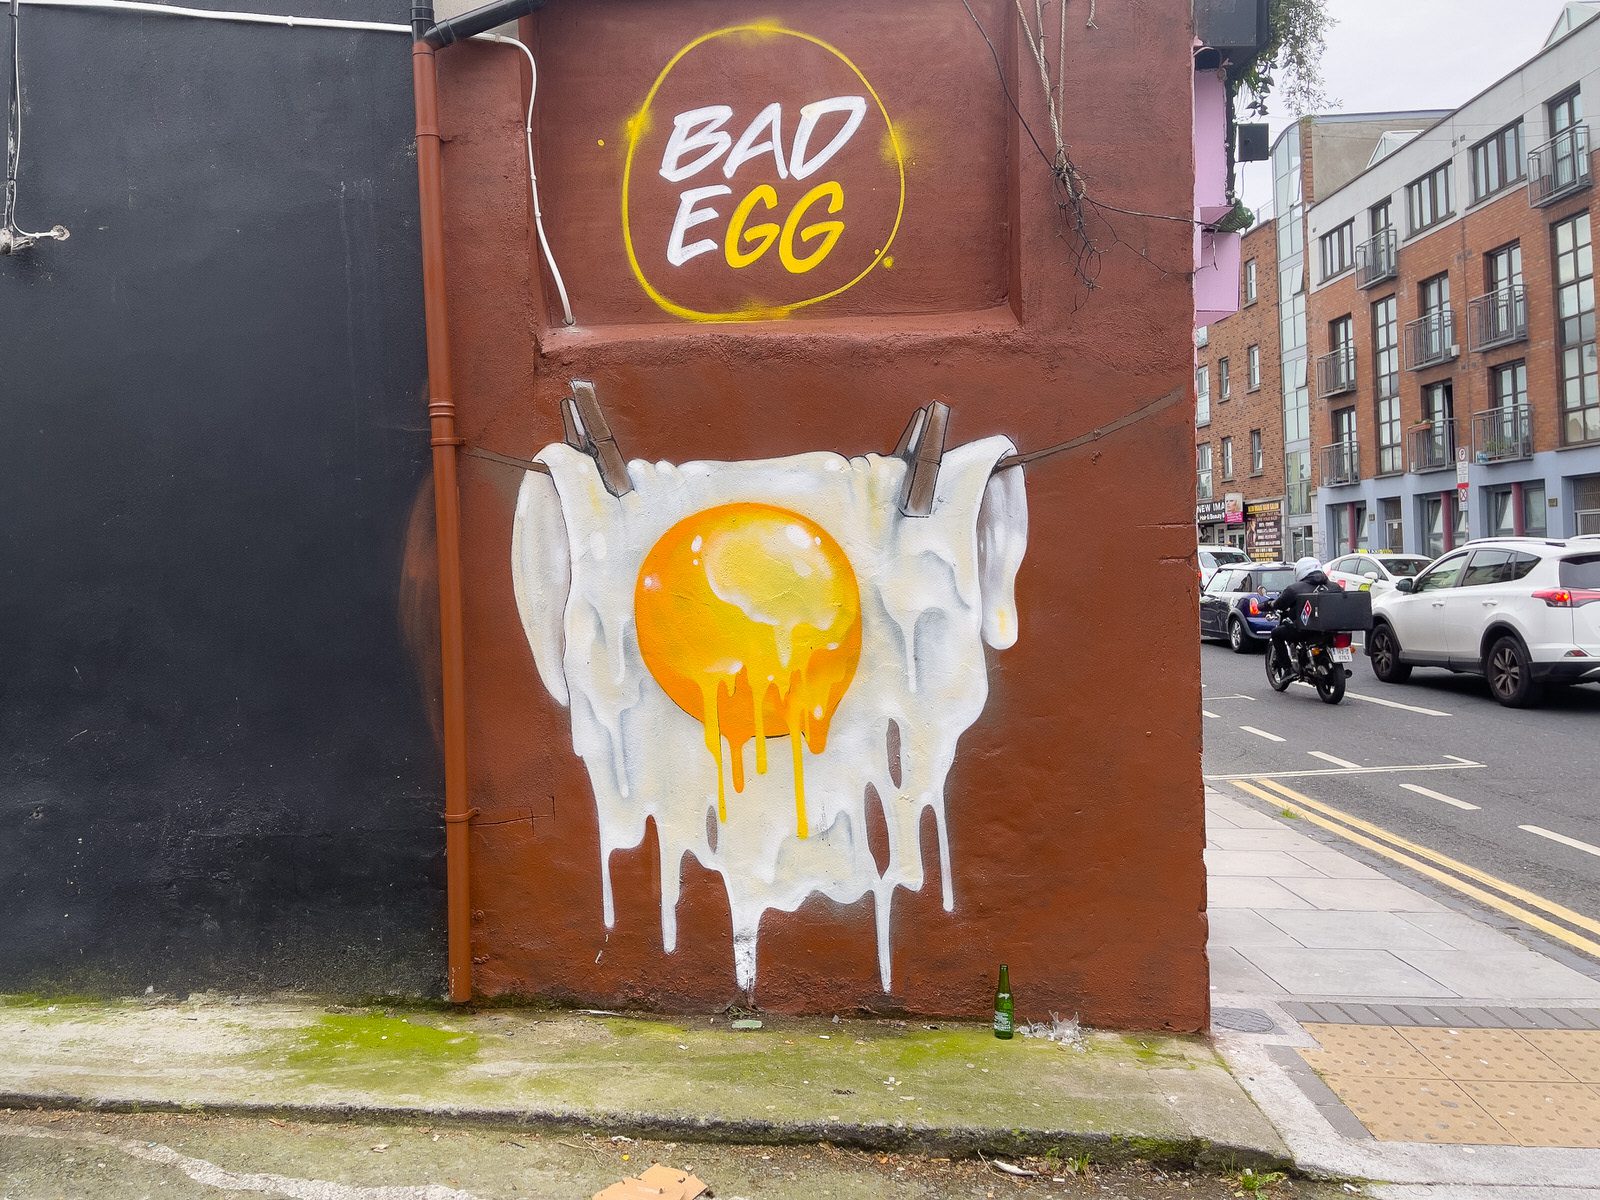 BAD EGG AT ROSEDALE TERRACE [IS THIS STREET ART OR A LOGO FOR A YET TO BE OPENED RESTAURANT] 002